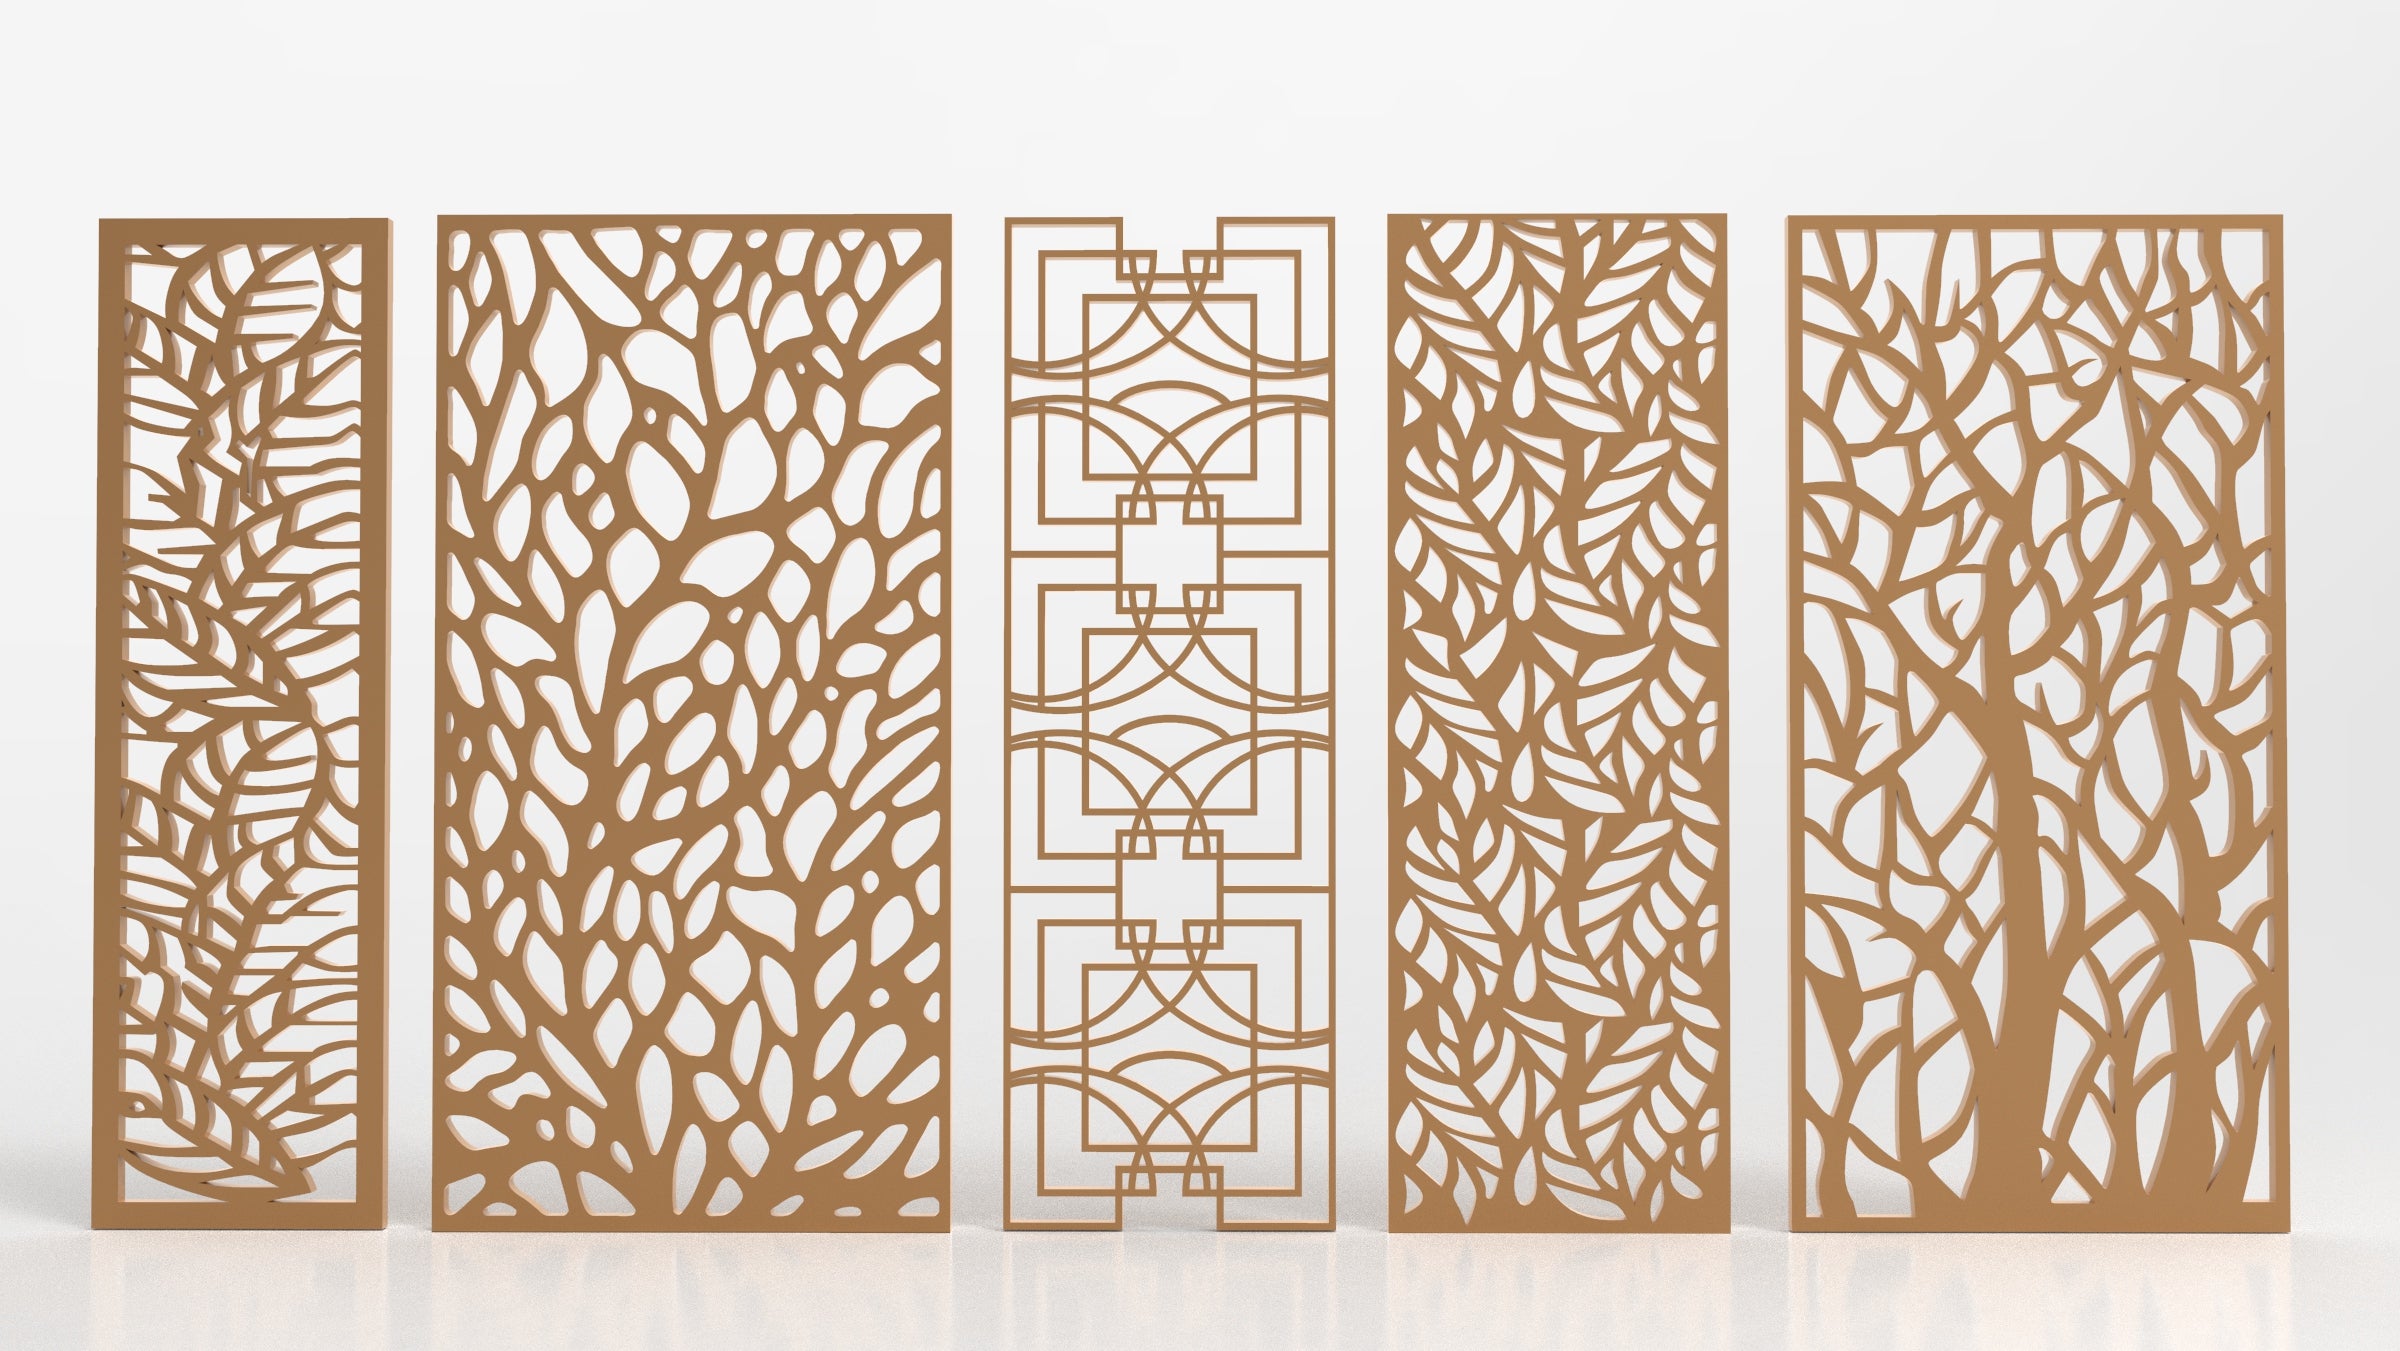 Tree Ornaments for decorative partitions panel screen CNC Laser Cutting File | SVG, DXF, AI |#C001|